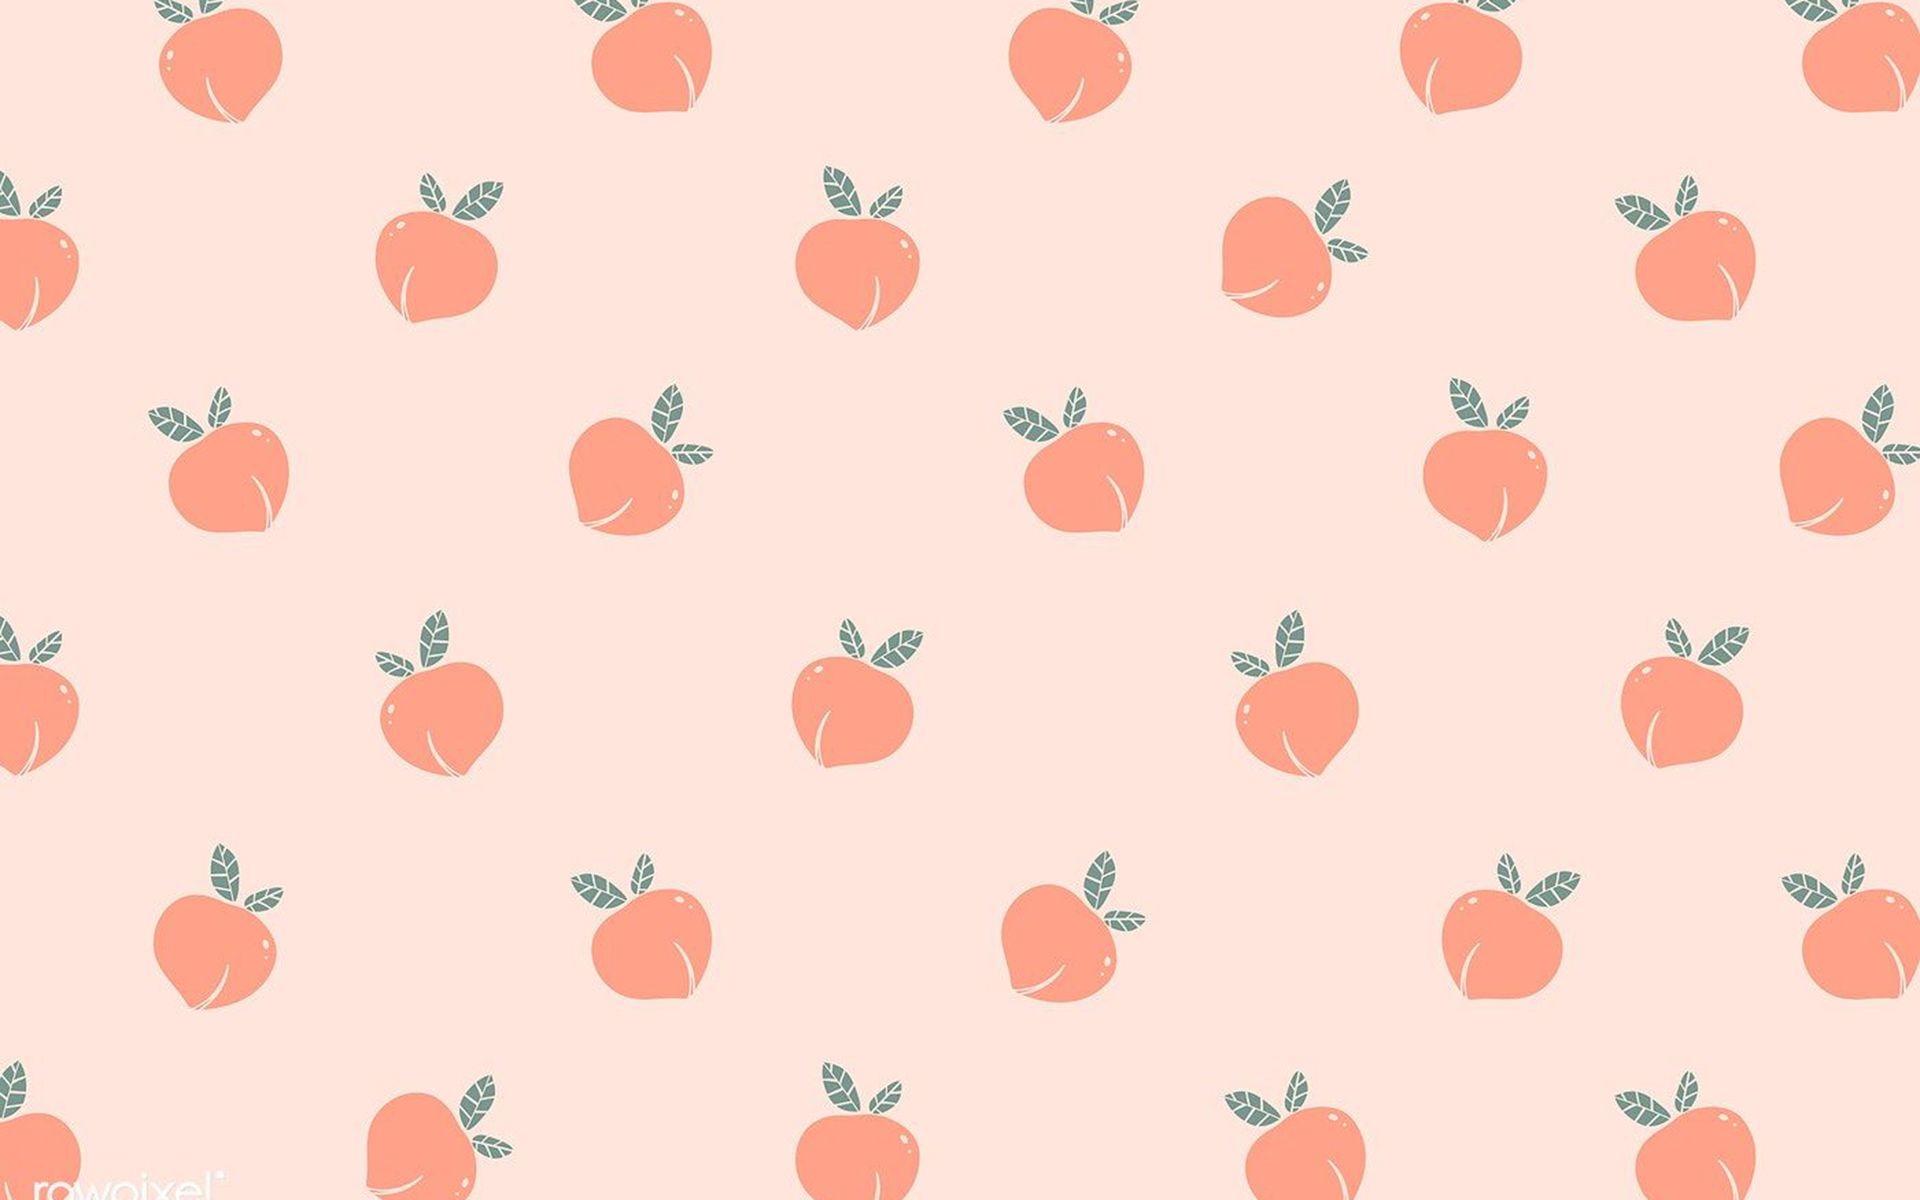 A pattern of peaches on pink background - Peach, fruit